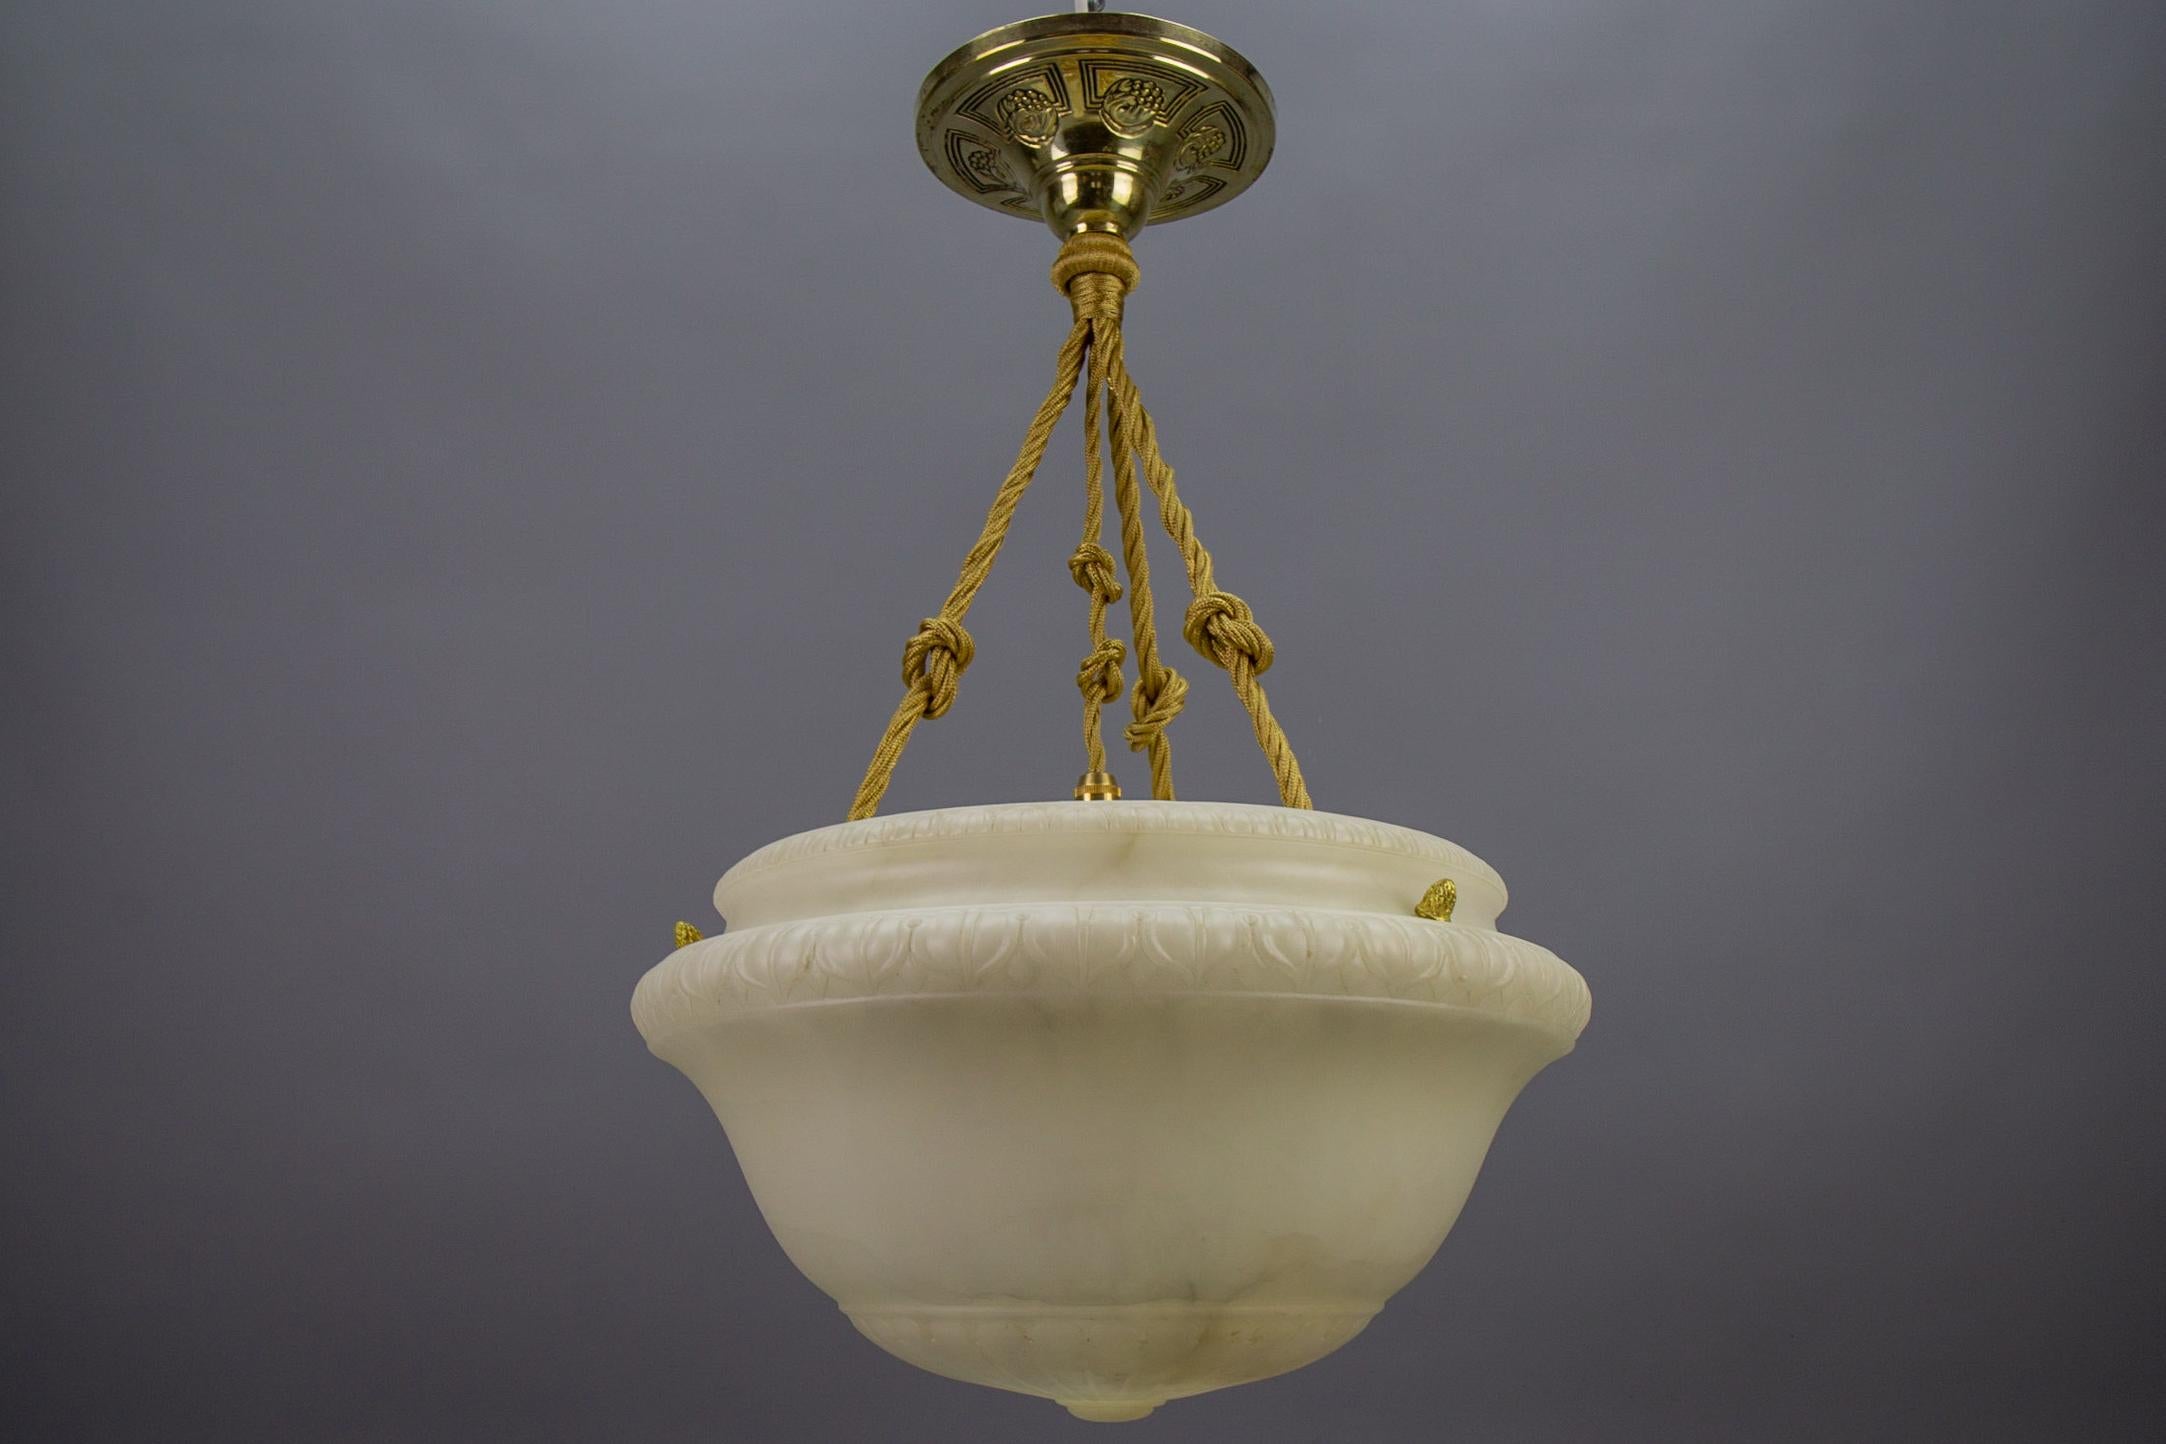 French Art Deco White Alabaster and Brass Pendant Light Fixture, circa 1920s For Sale 9